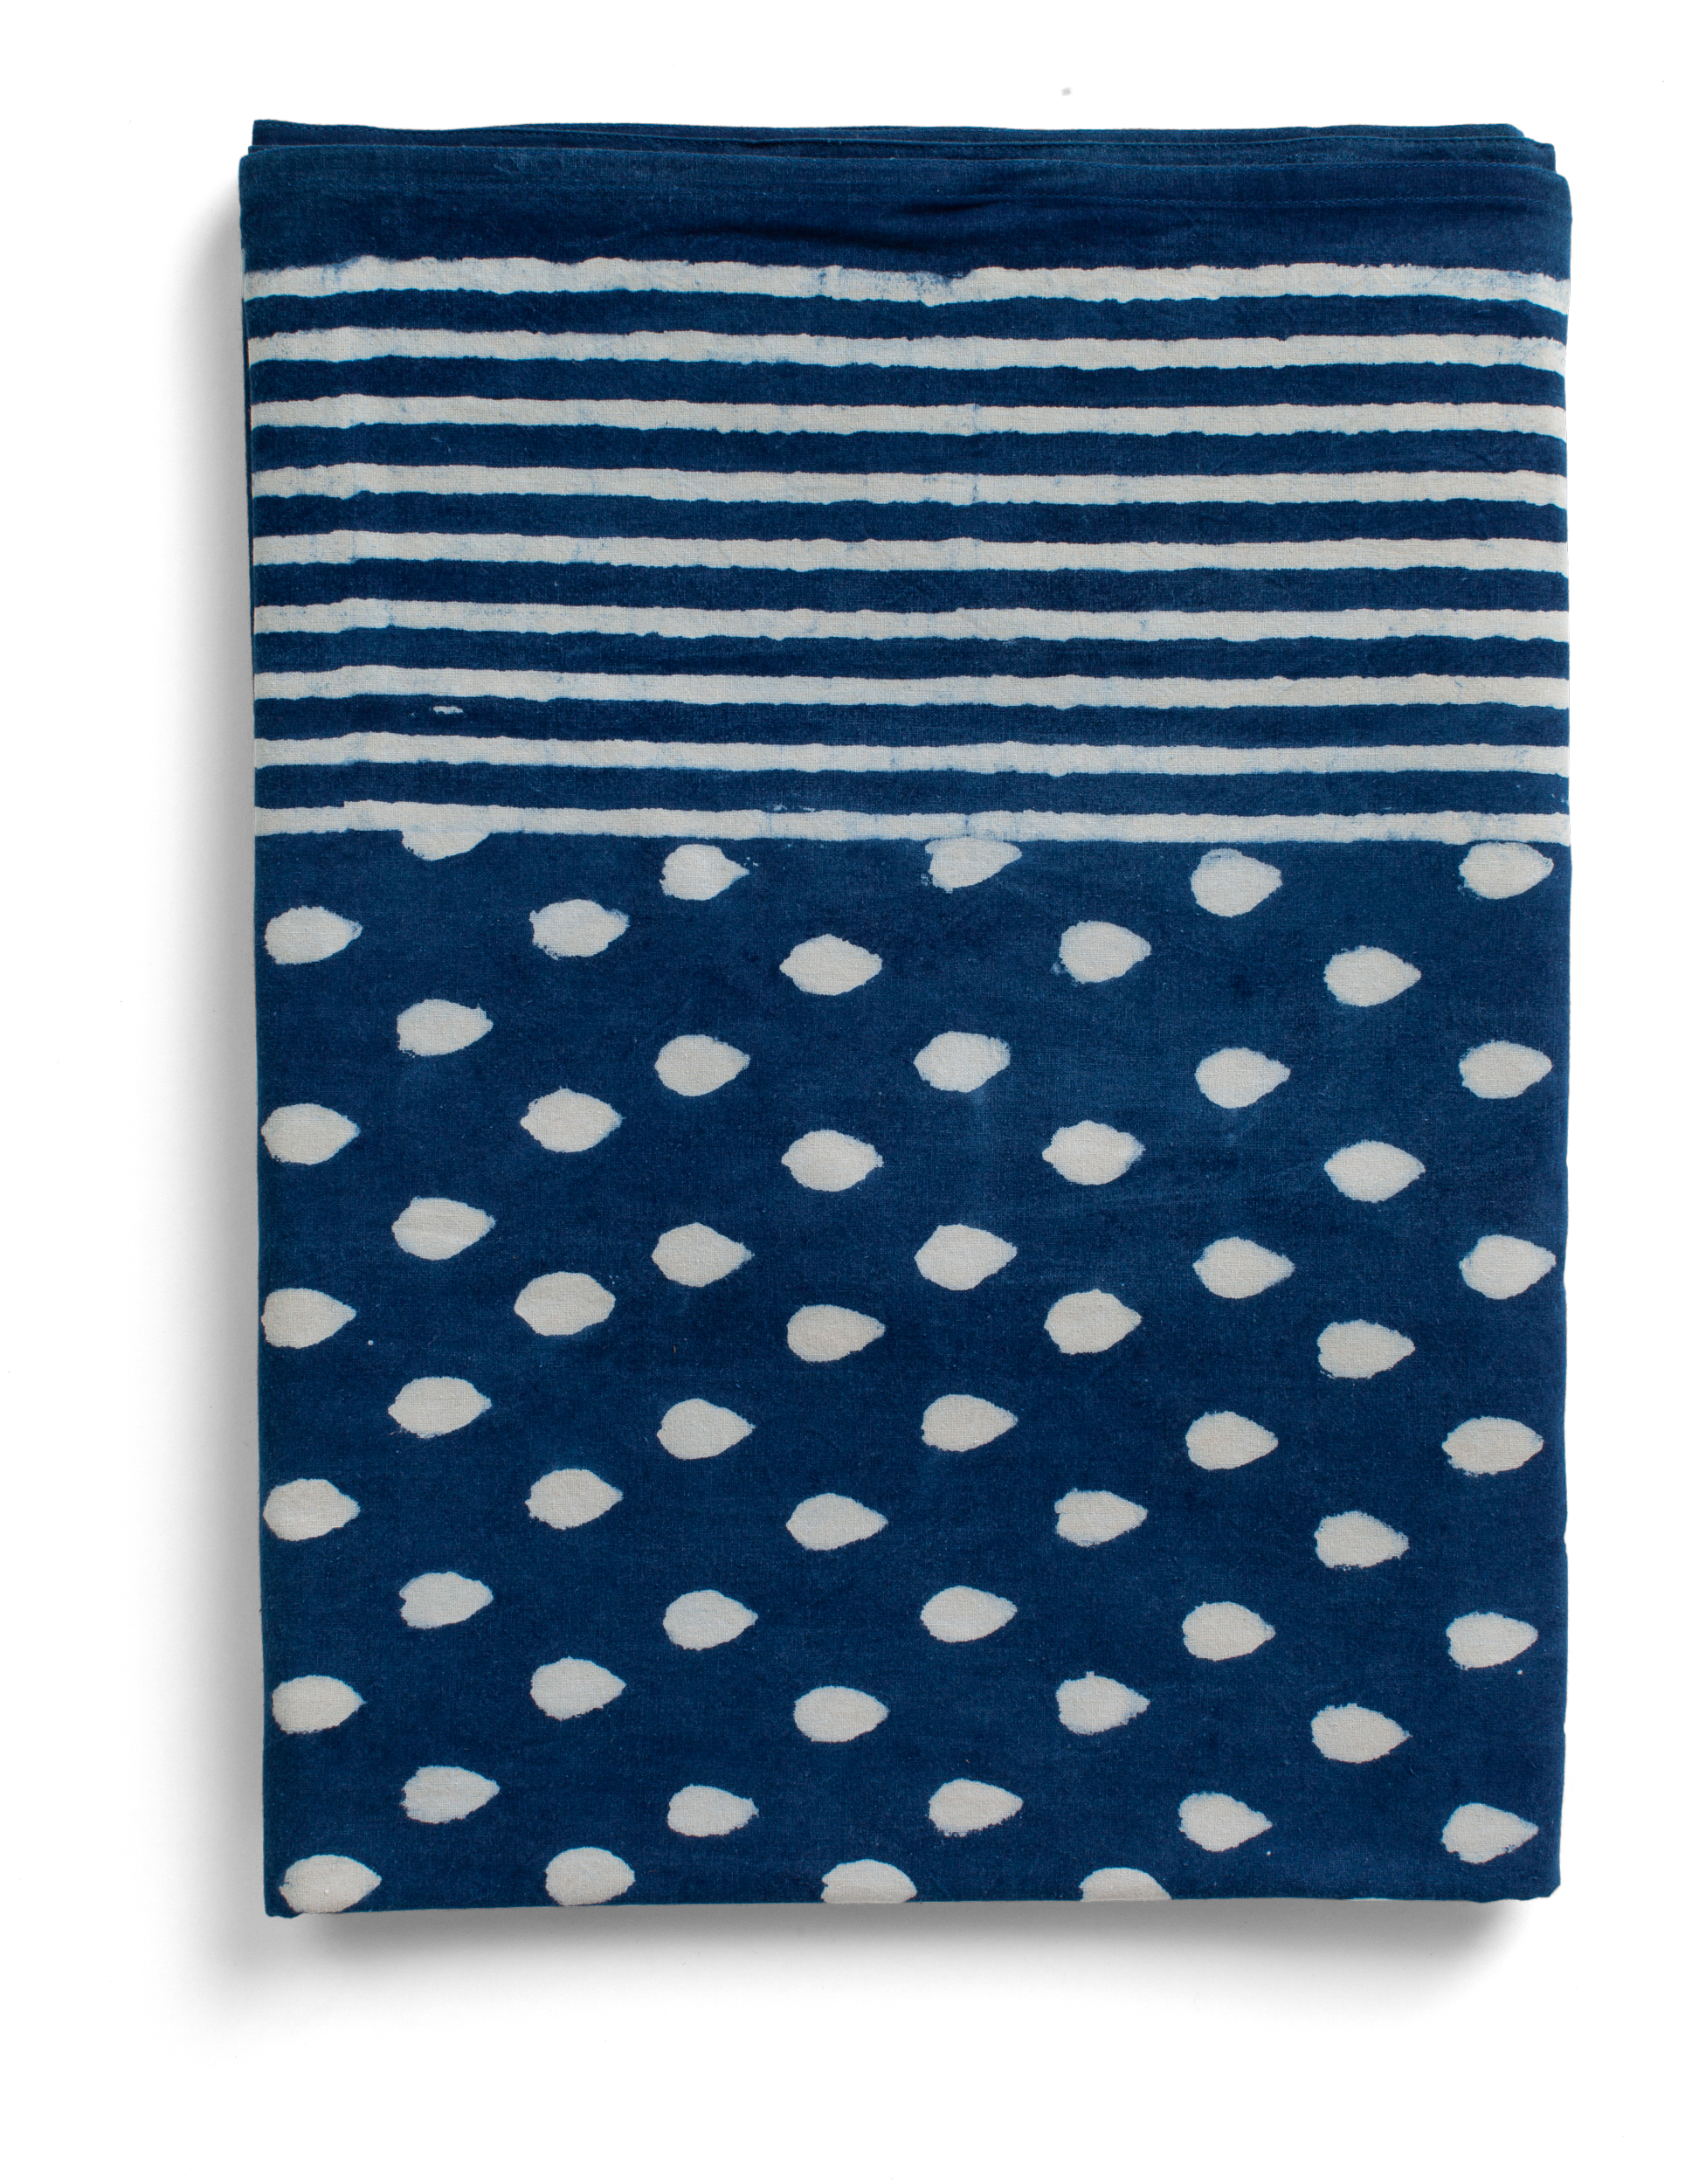 Tablecloth with Drop print in Indigo